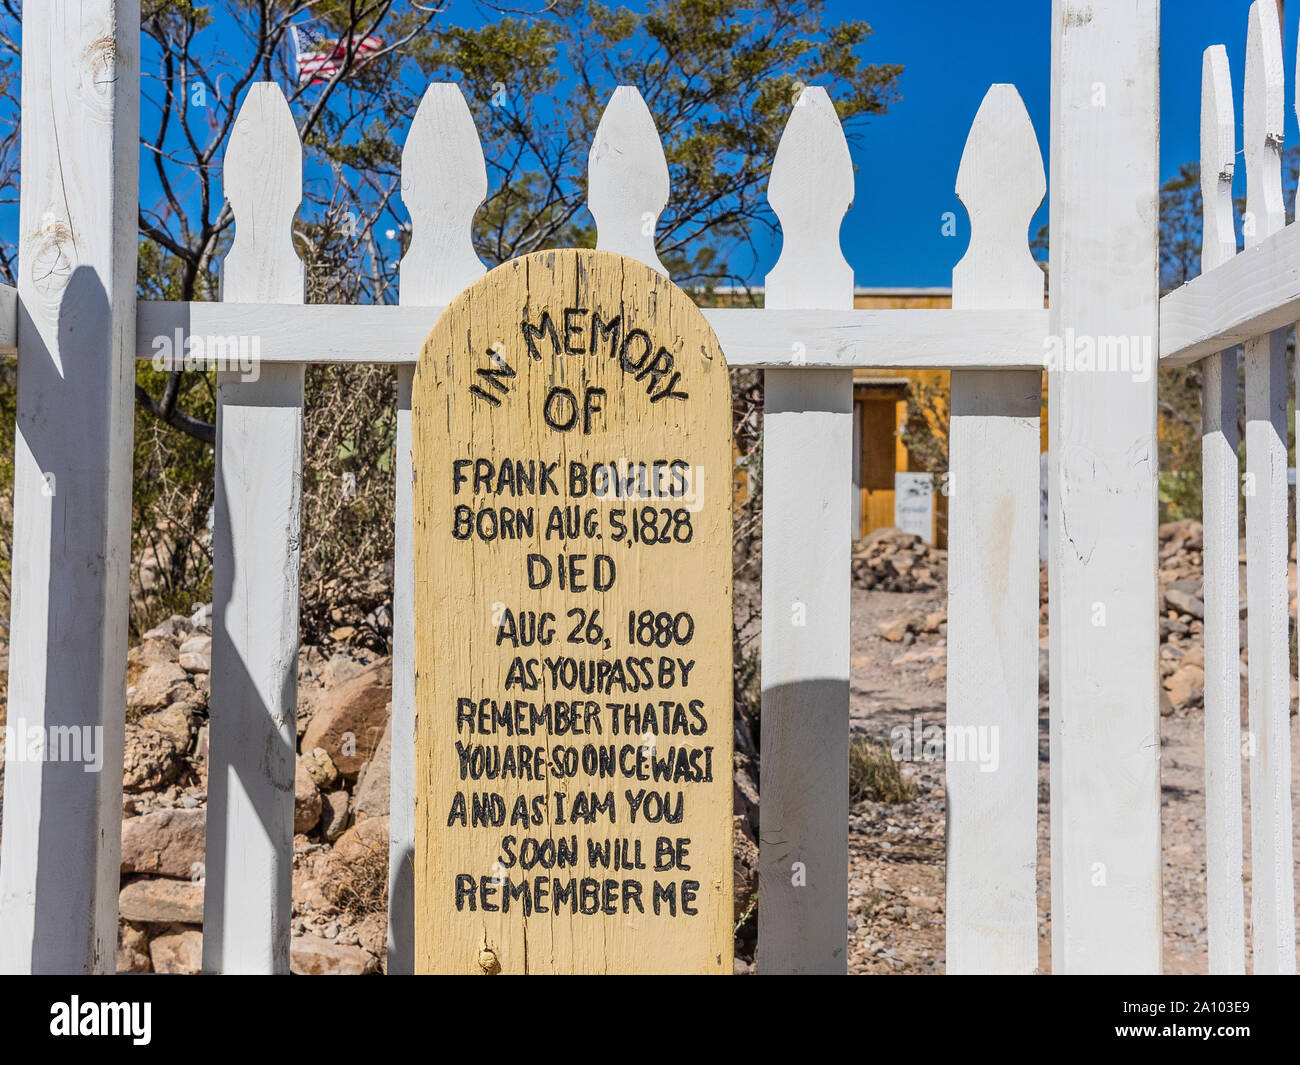 Grave of Frank Bowles with a wooden tombstone in Boothill Graveyard in Tombstone, Arizona. Stock Photo